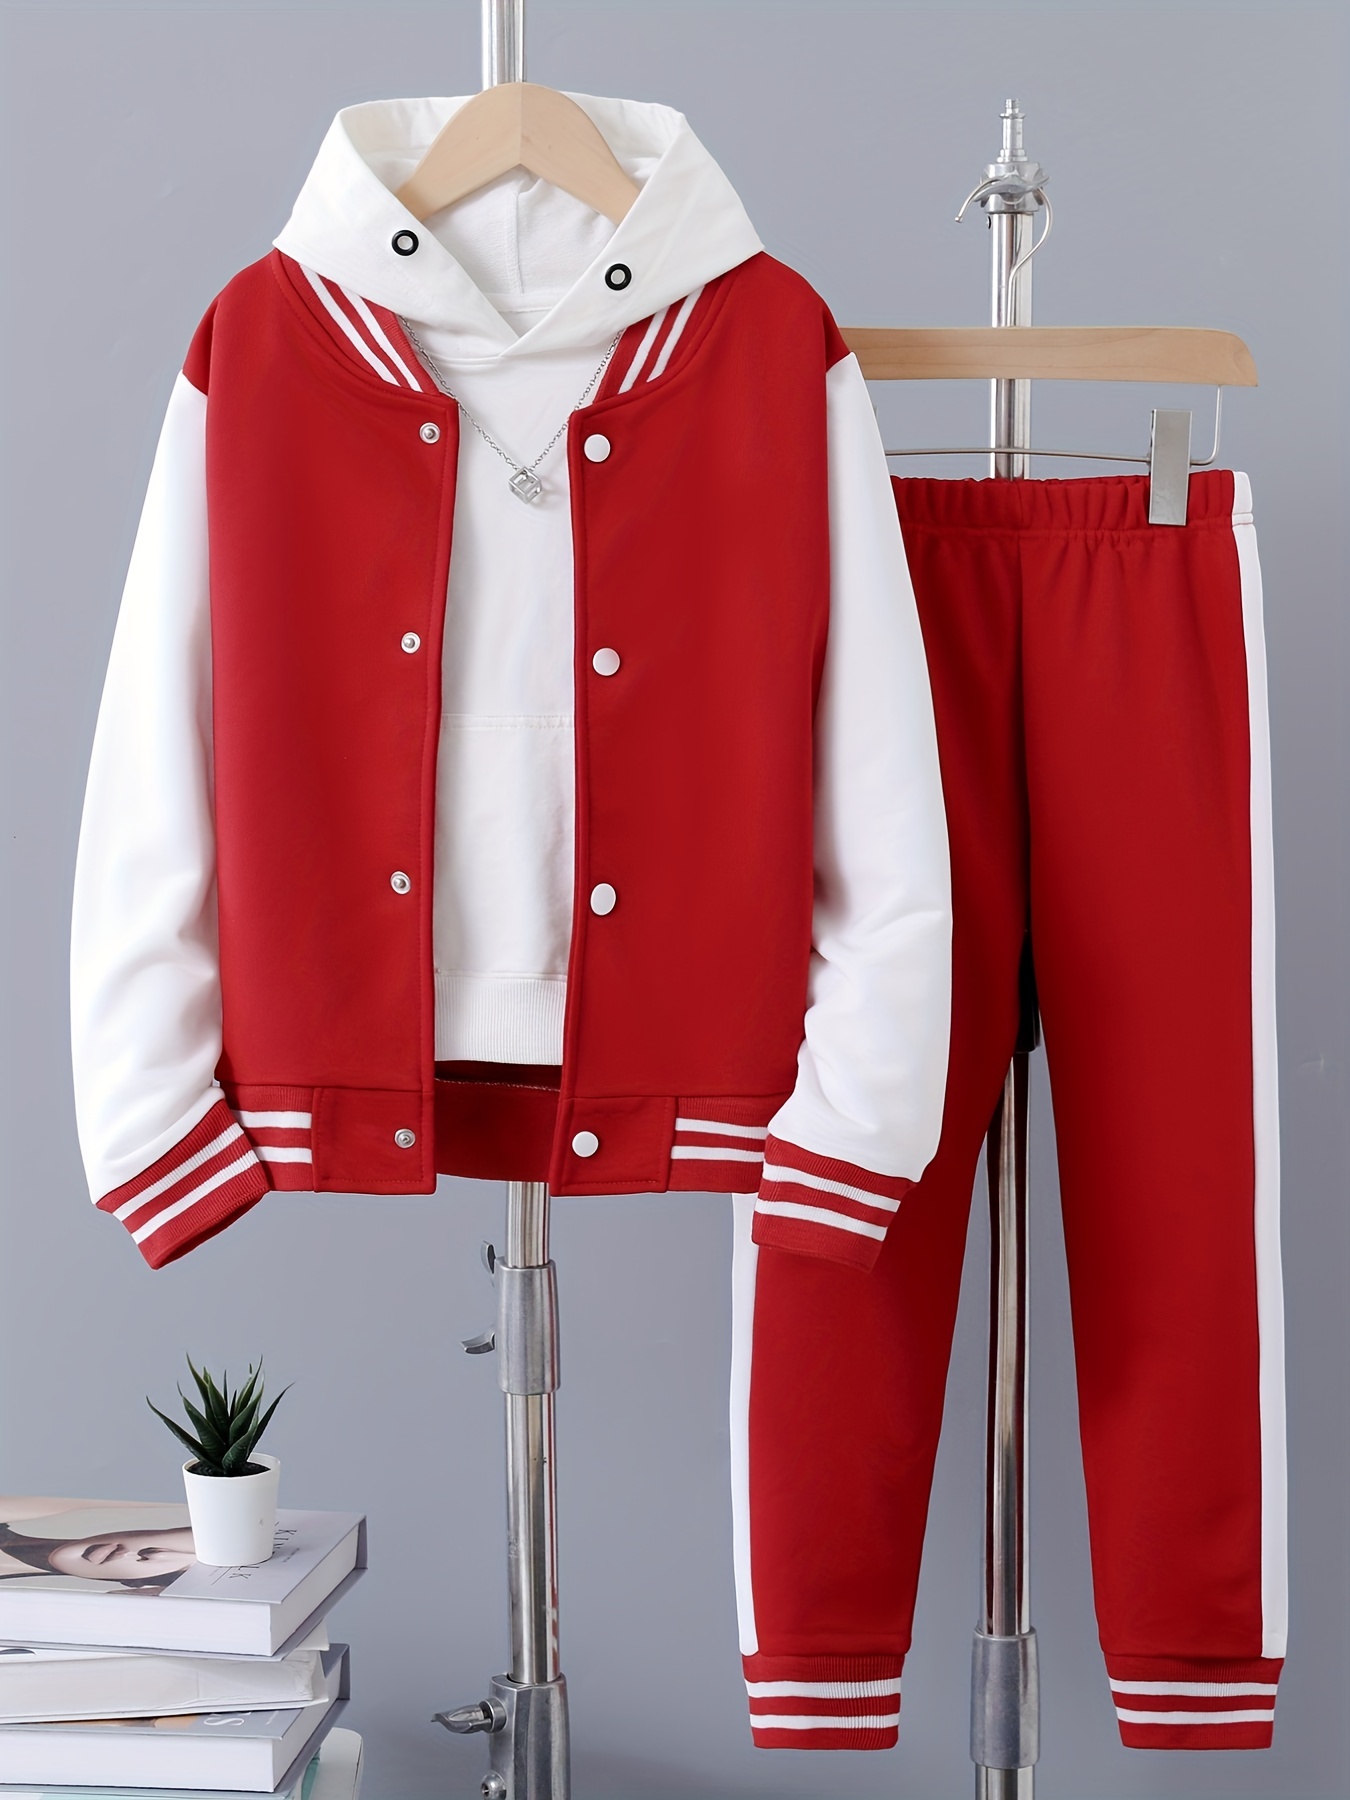 Kids Boys Girls Casual Sports Wear Track Suit Jacket Coat with Contrast  Panels